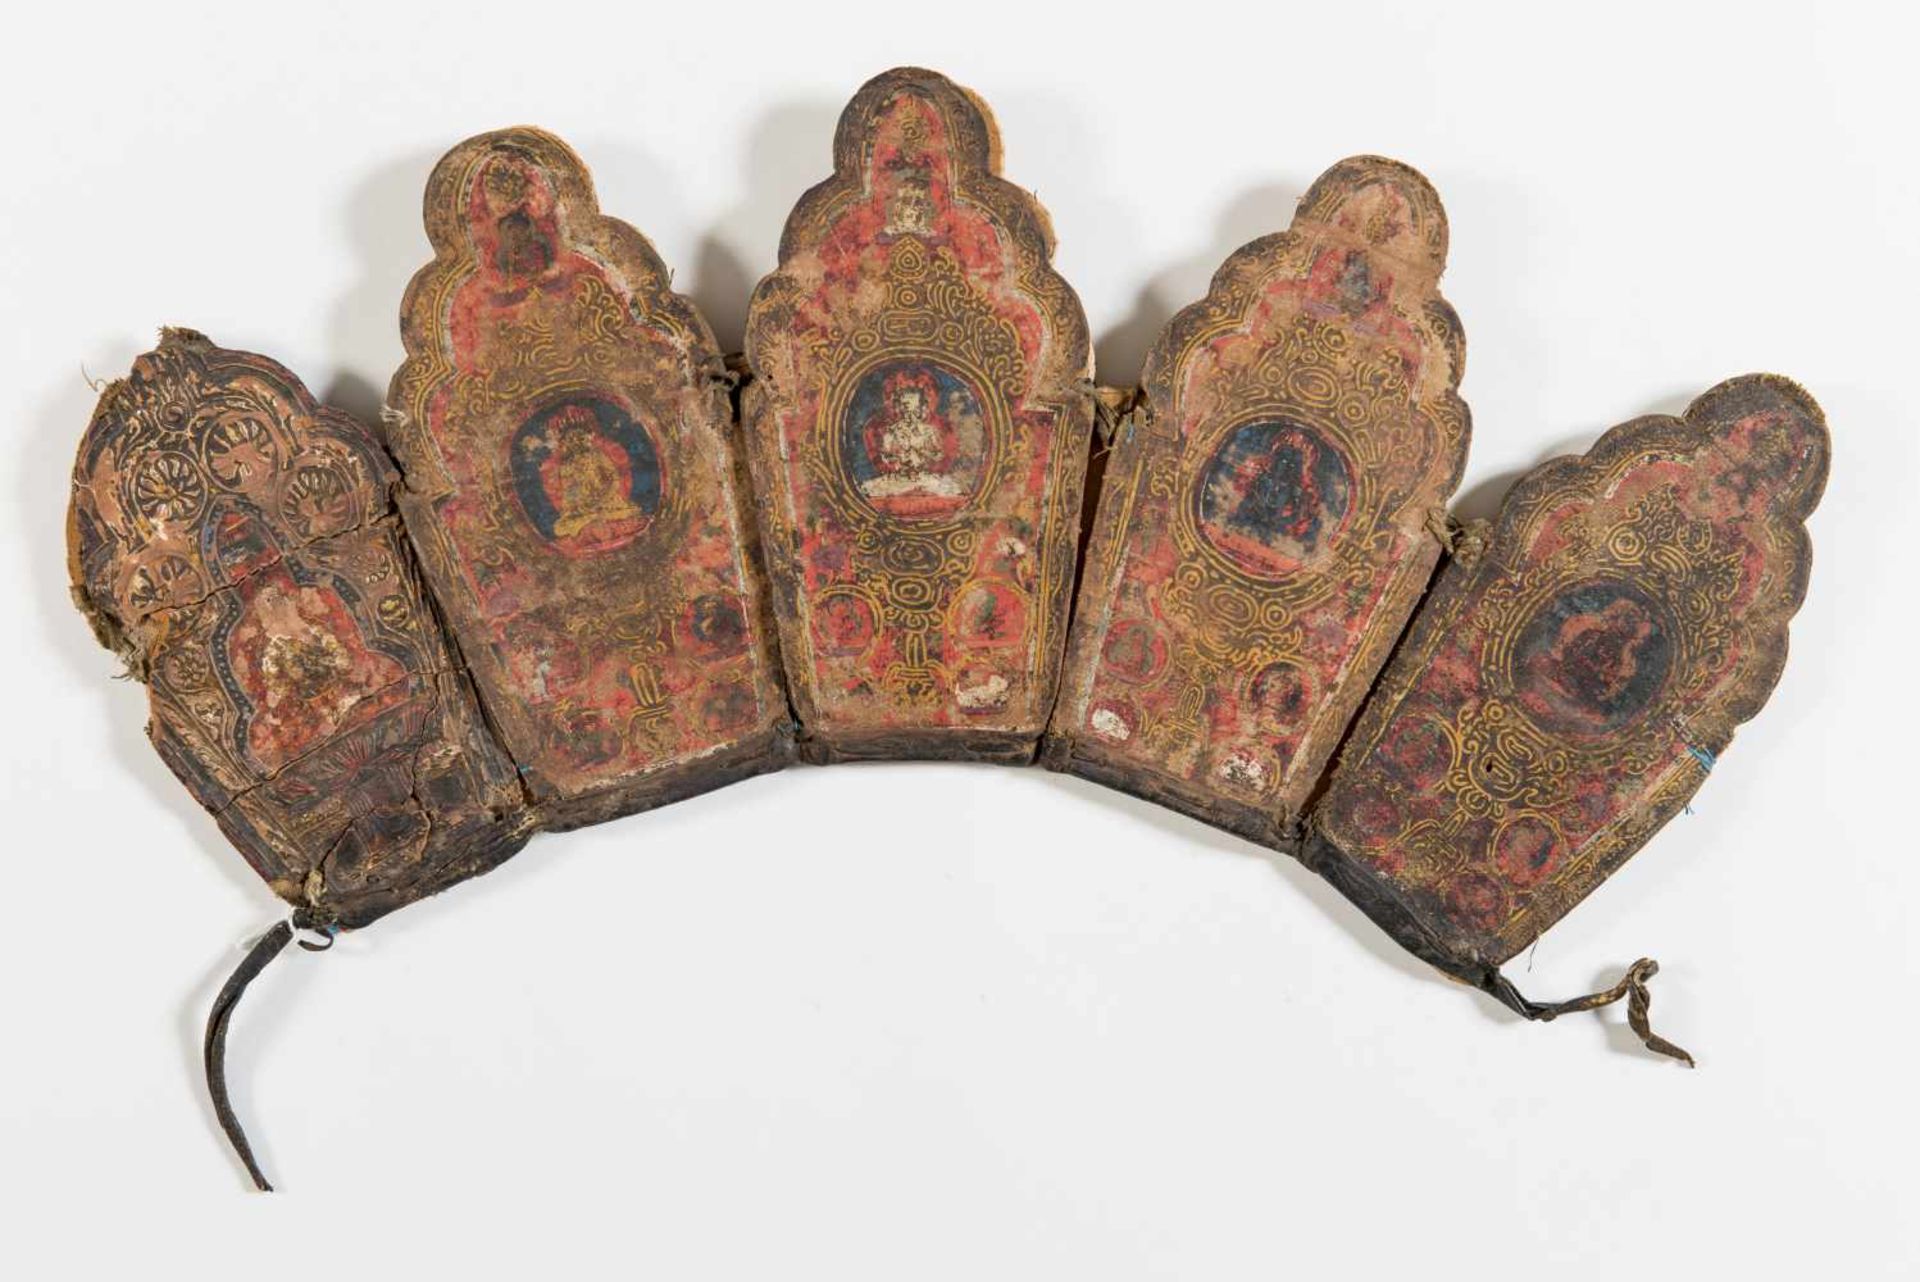 RITUAL CROWN OF A LAMAColor on textile on papier mâché, leatherTibet, 15th centuryCrown in the - Image 2 of 2